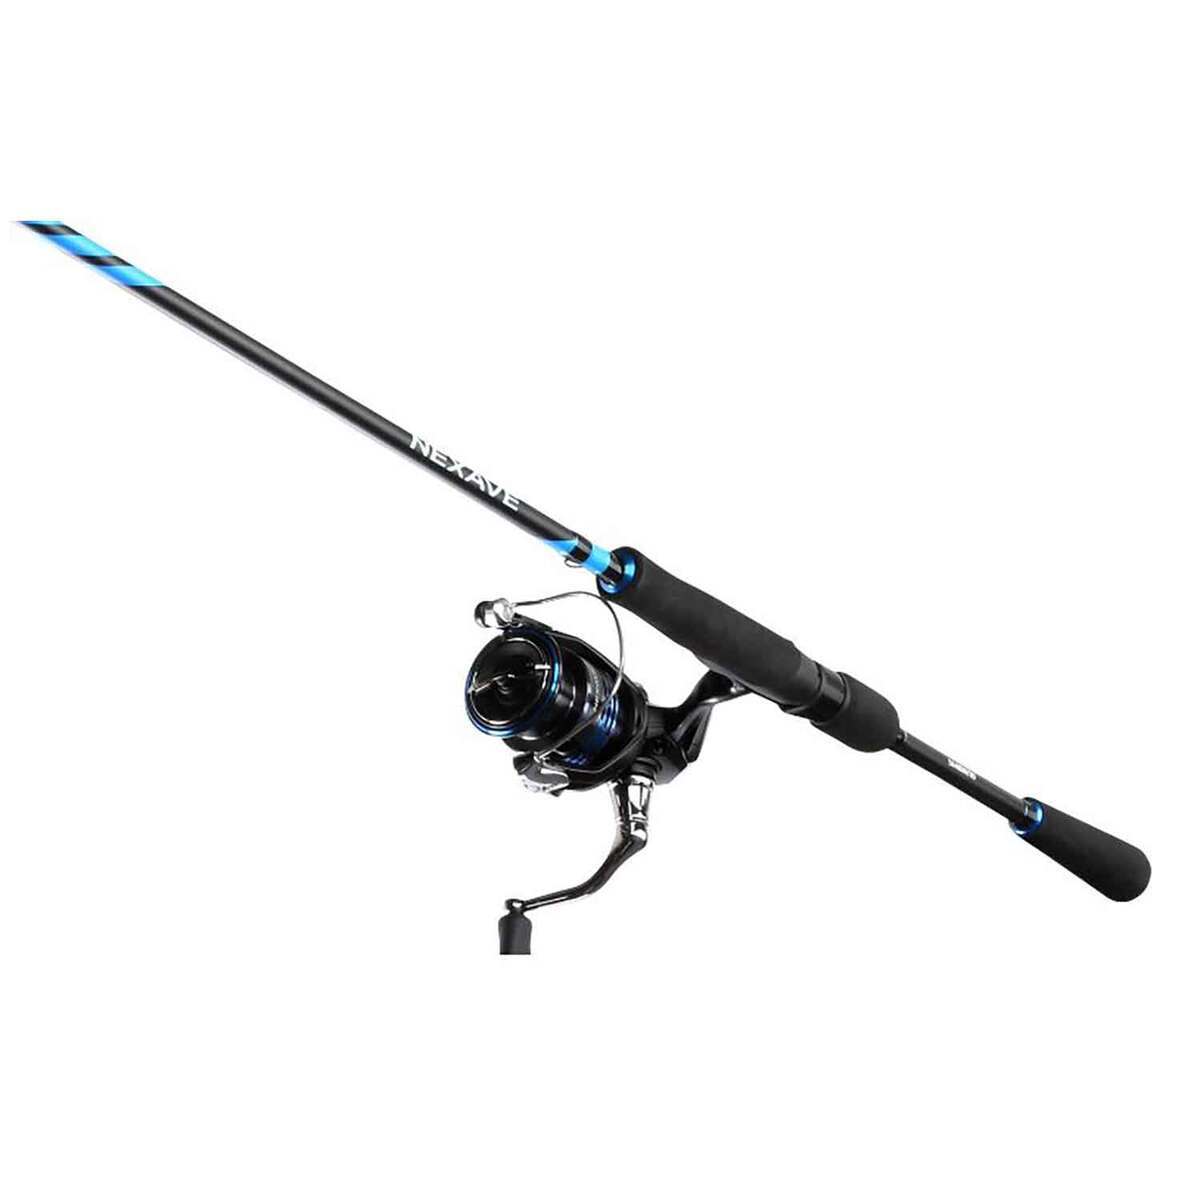 Rods, Reels, and Combos